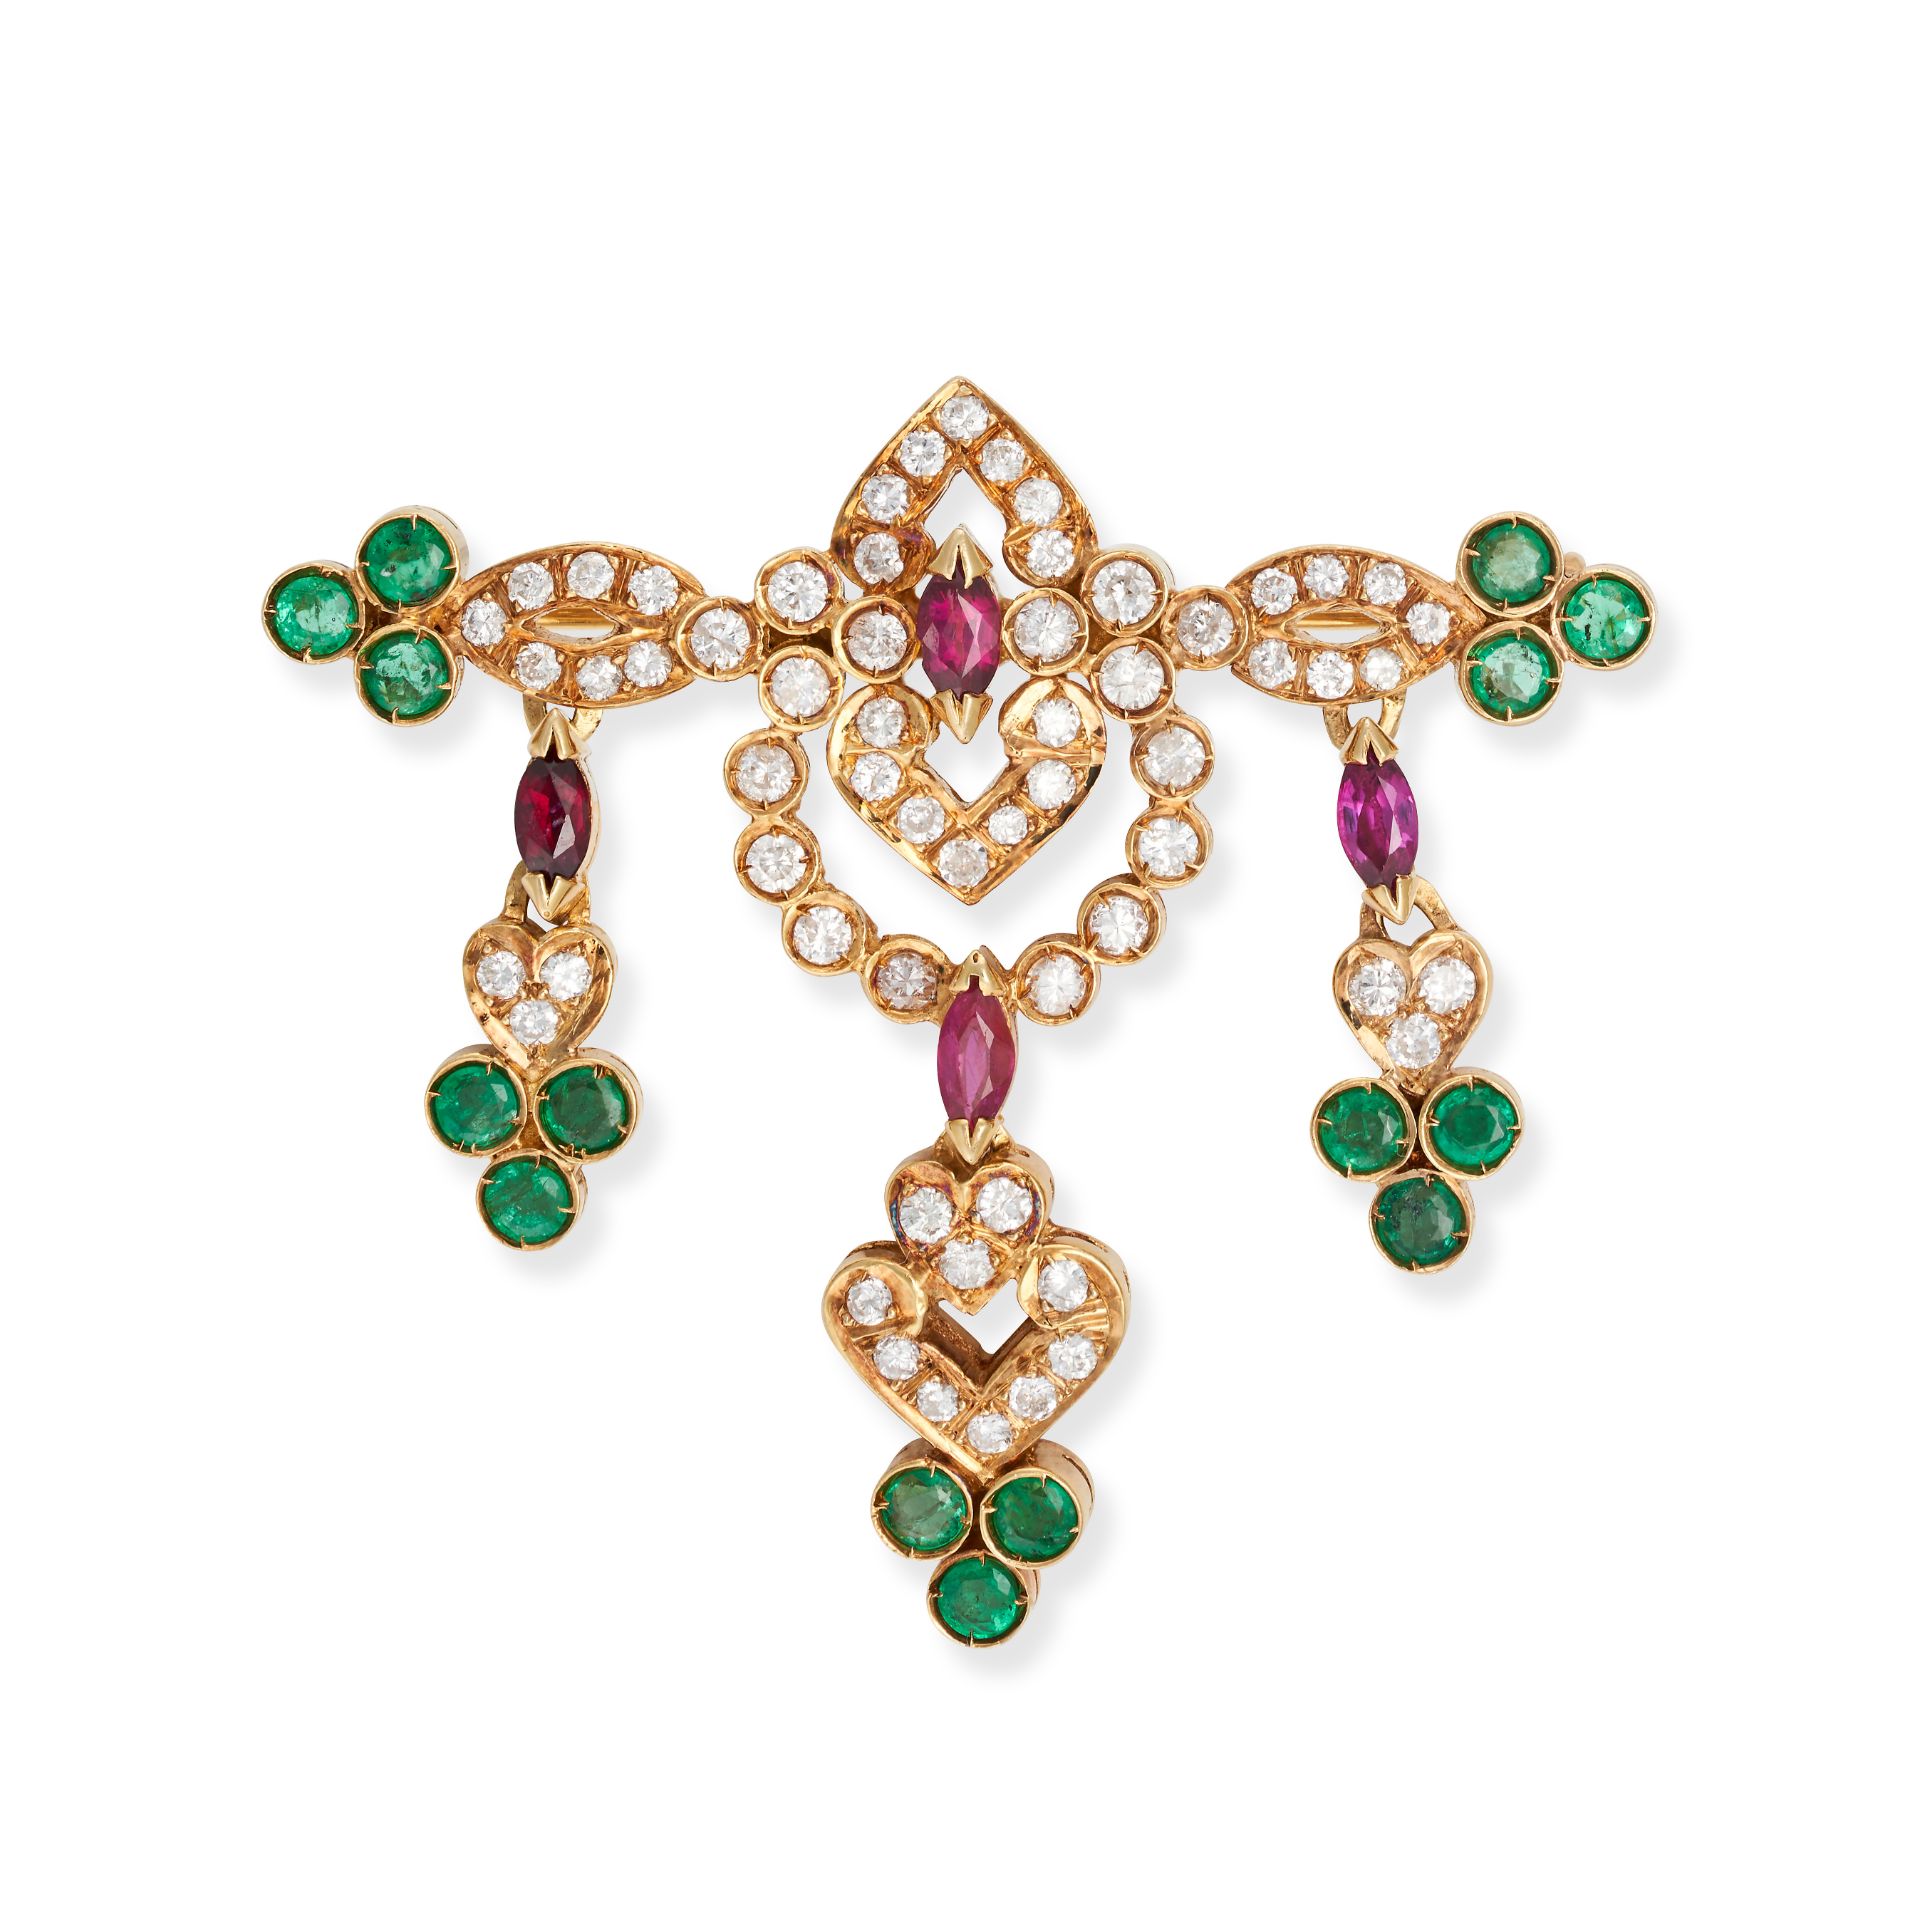 AN EMERALD, RUBY AND DIAMOND BROOCH set with round cut emeralds, marquise cut rubies and round br...